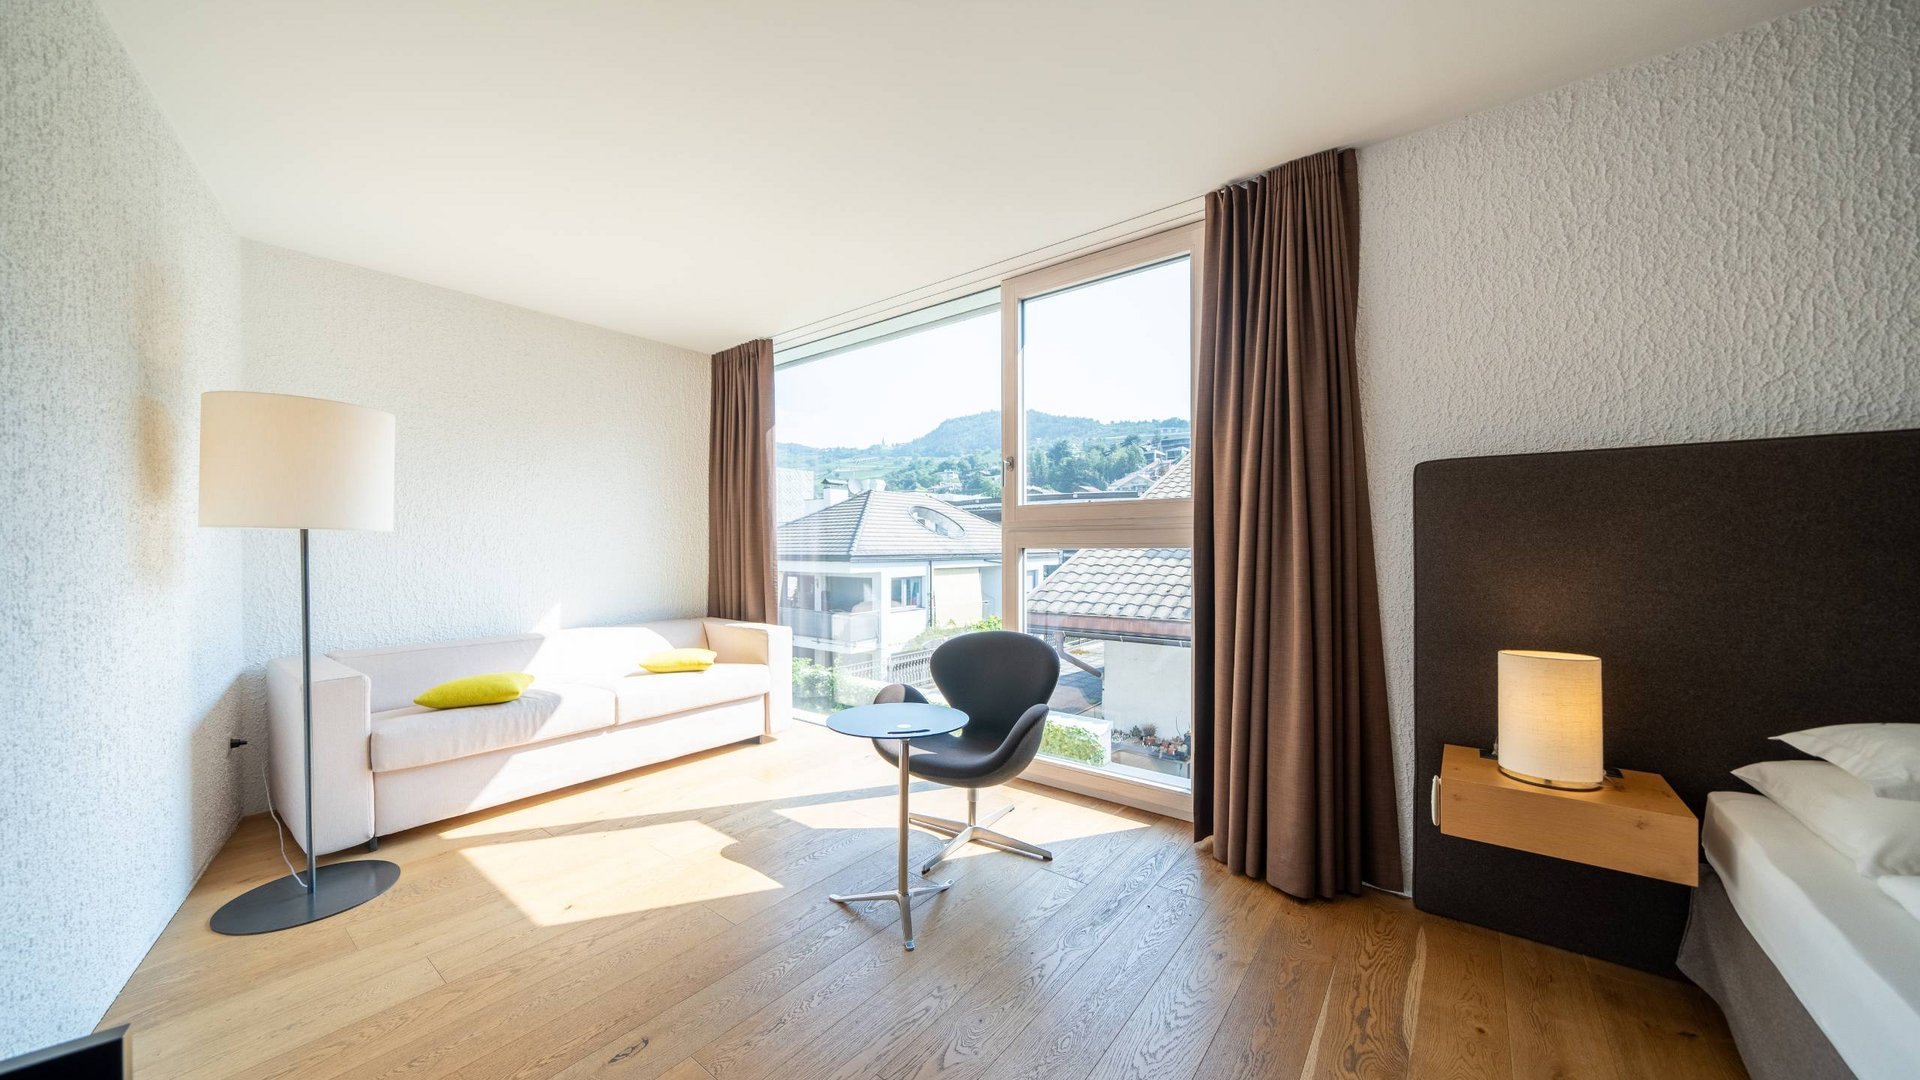 Suites at our B&B in Brixen